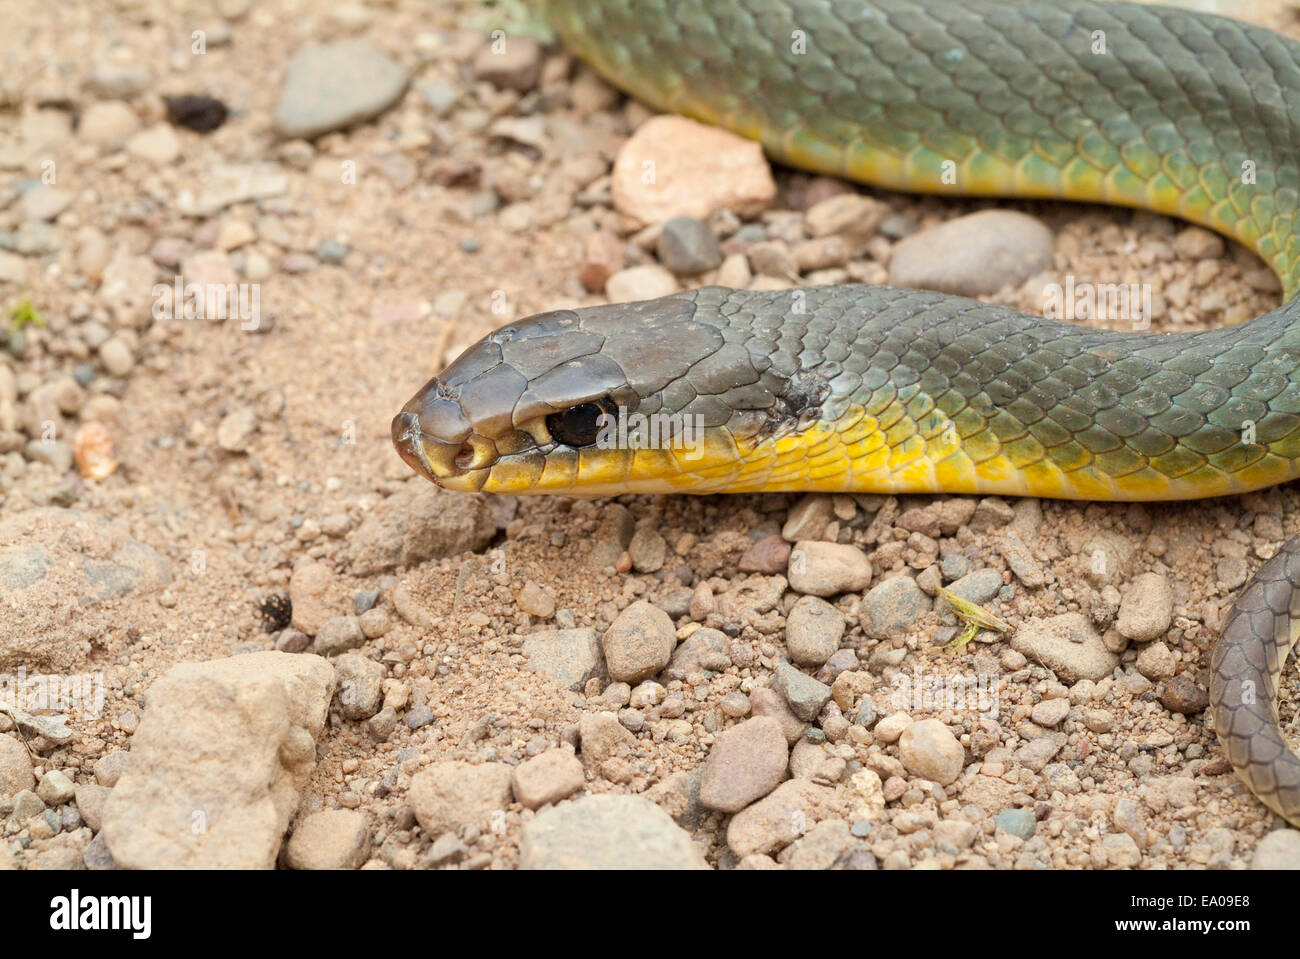 Eastern yellow-bellied racer, Coluber constrictor flaviventris, endemic to North America Stock Photo